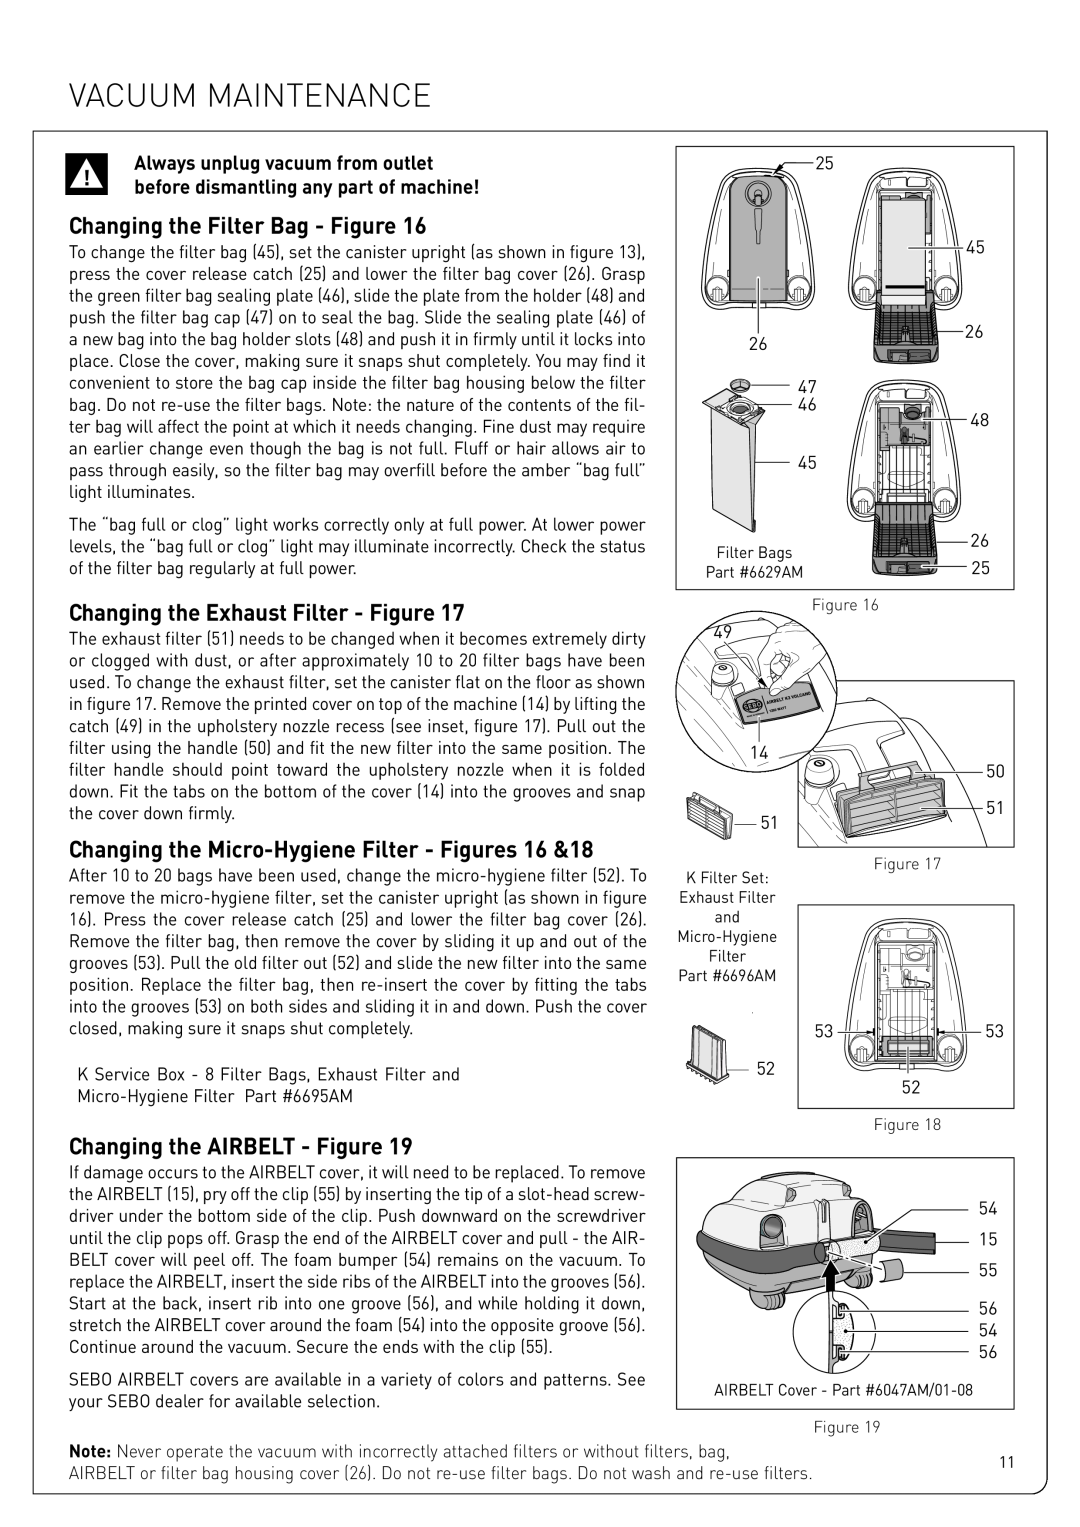 Sebo K2, K3 owner manual Vacuum Maintenance, Changing the Filter Bag - Figure, Changing the Exhaust Filter - Figure 